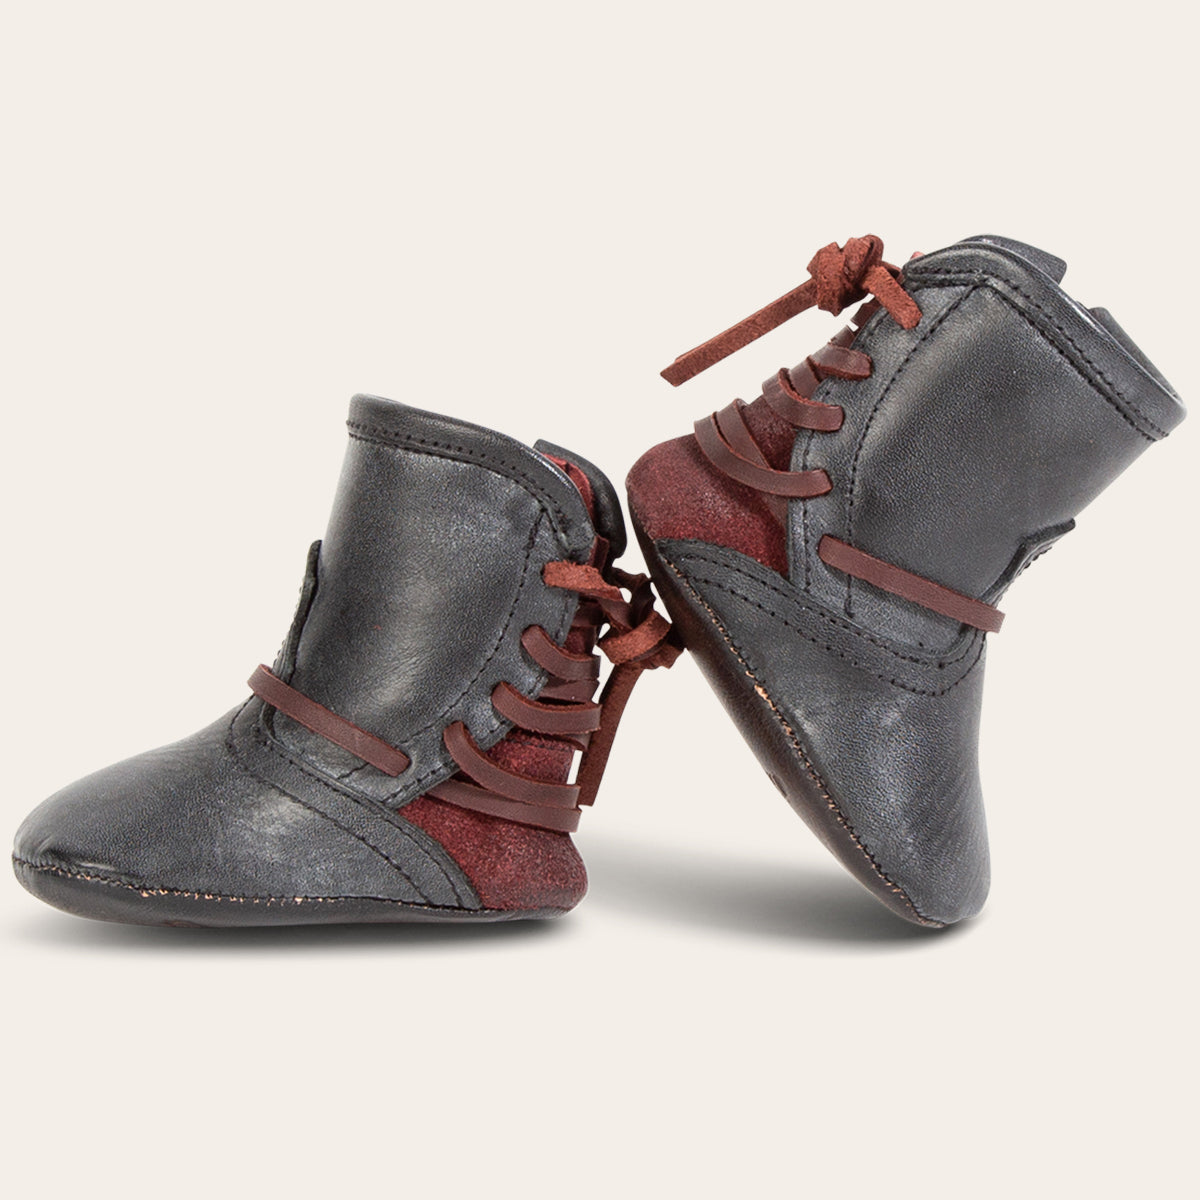 side view showing contrasting back lace detailing on FREEBIRD infant baby coal black leather bootie